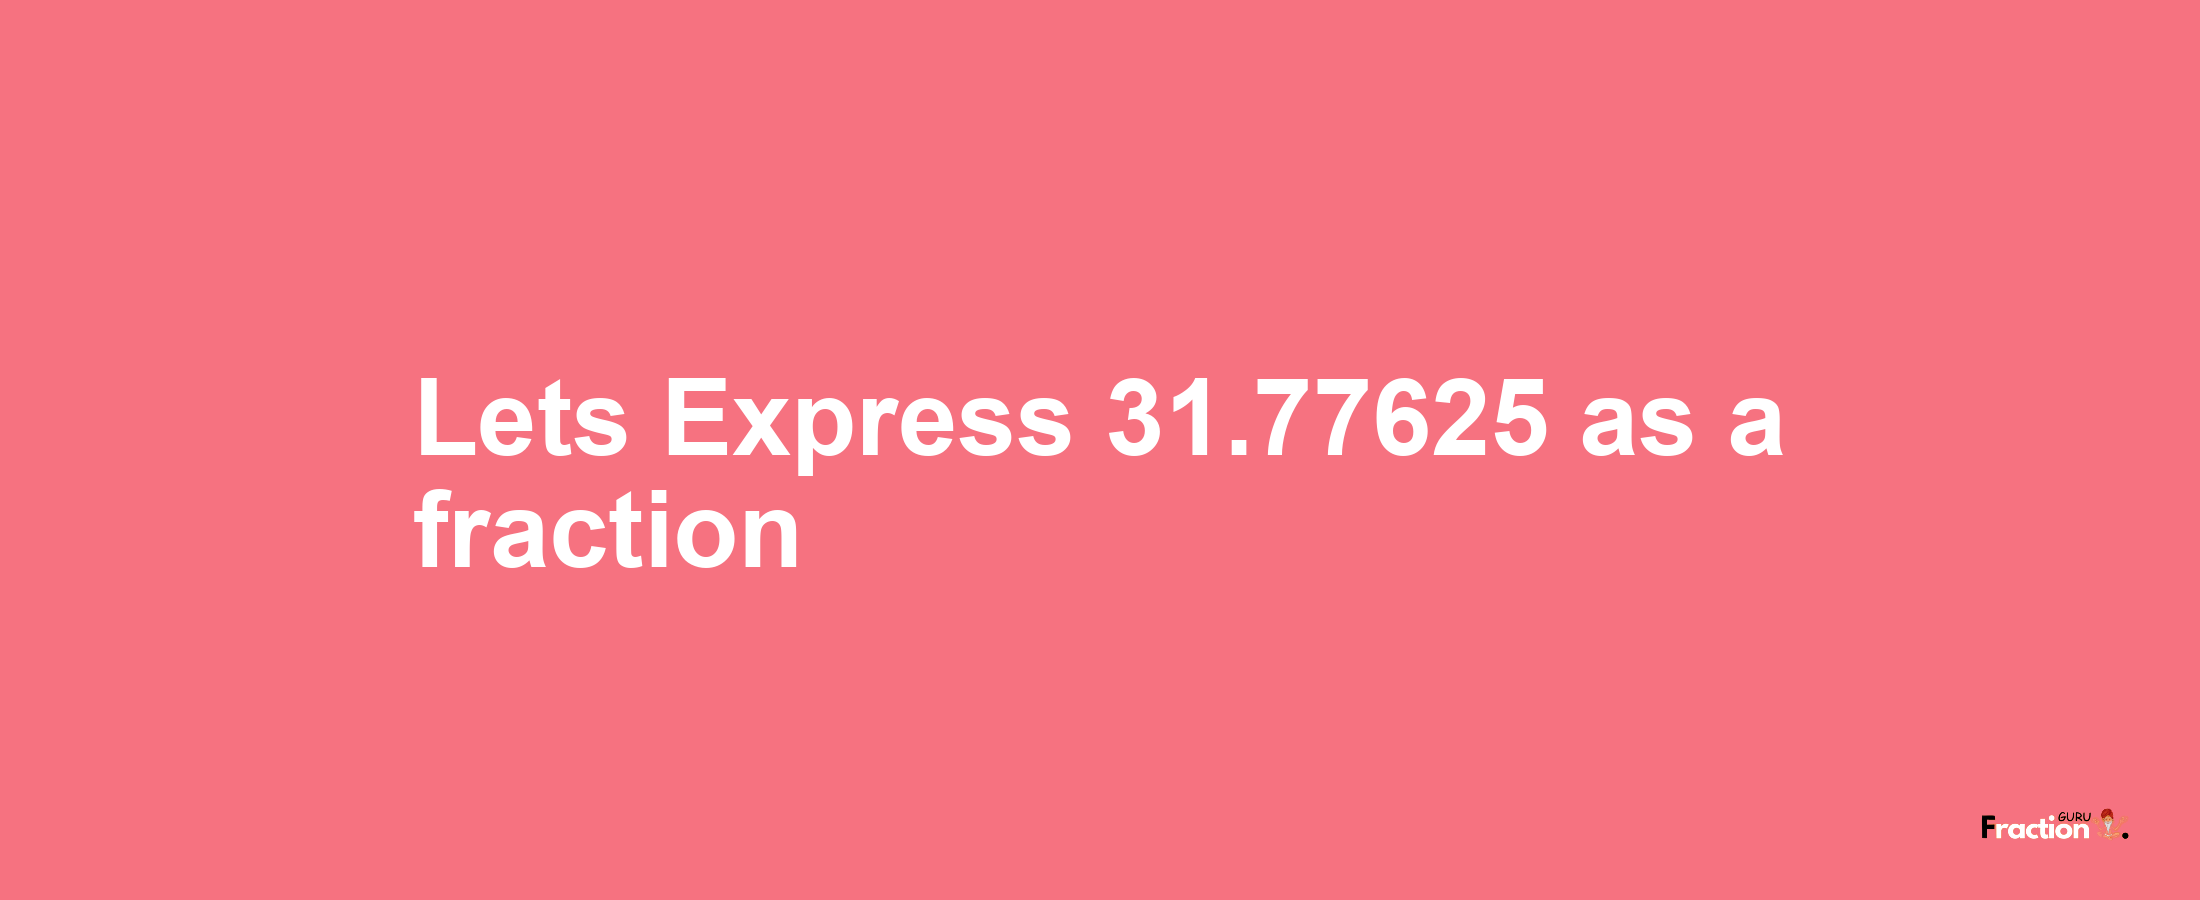 Lets Express 31.77625 as afraction